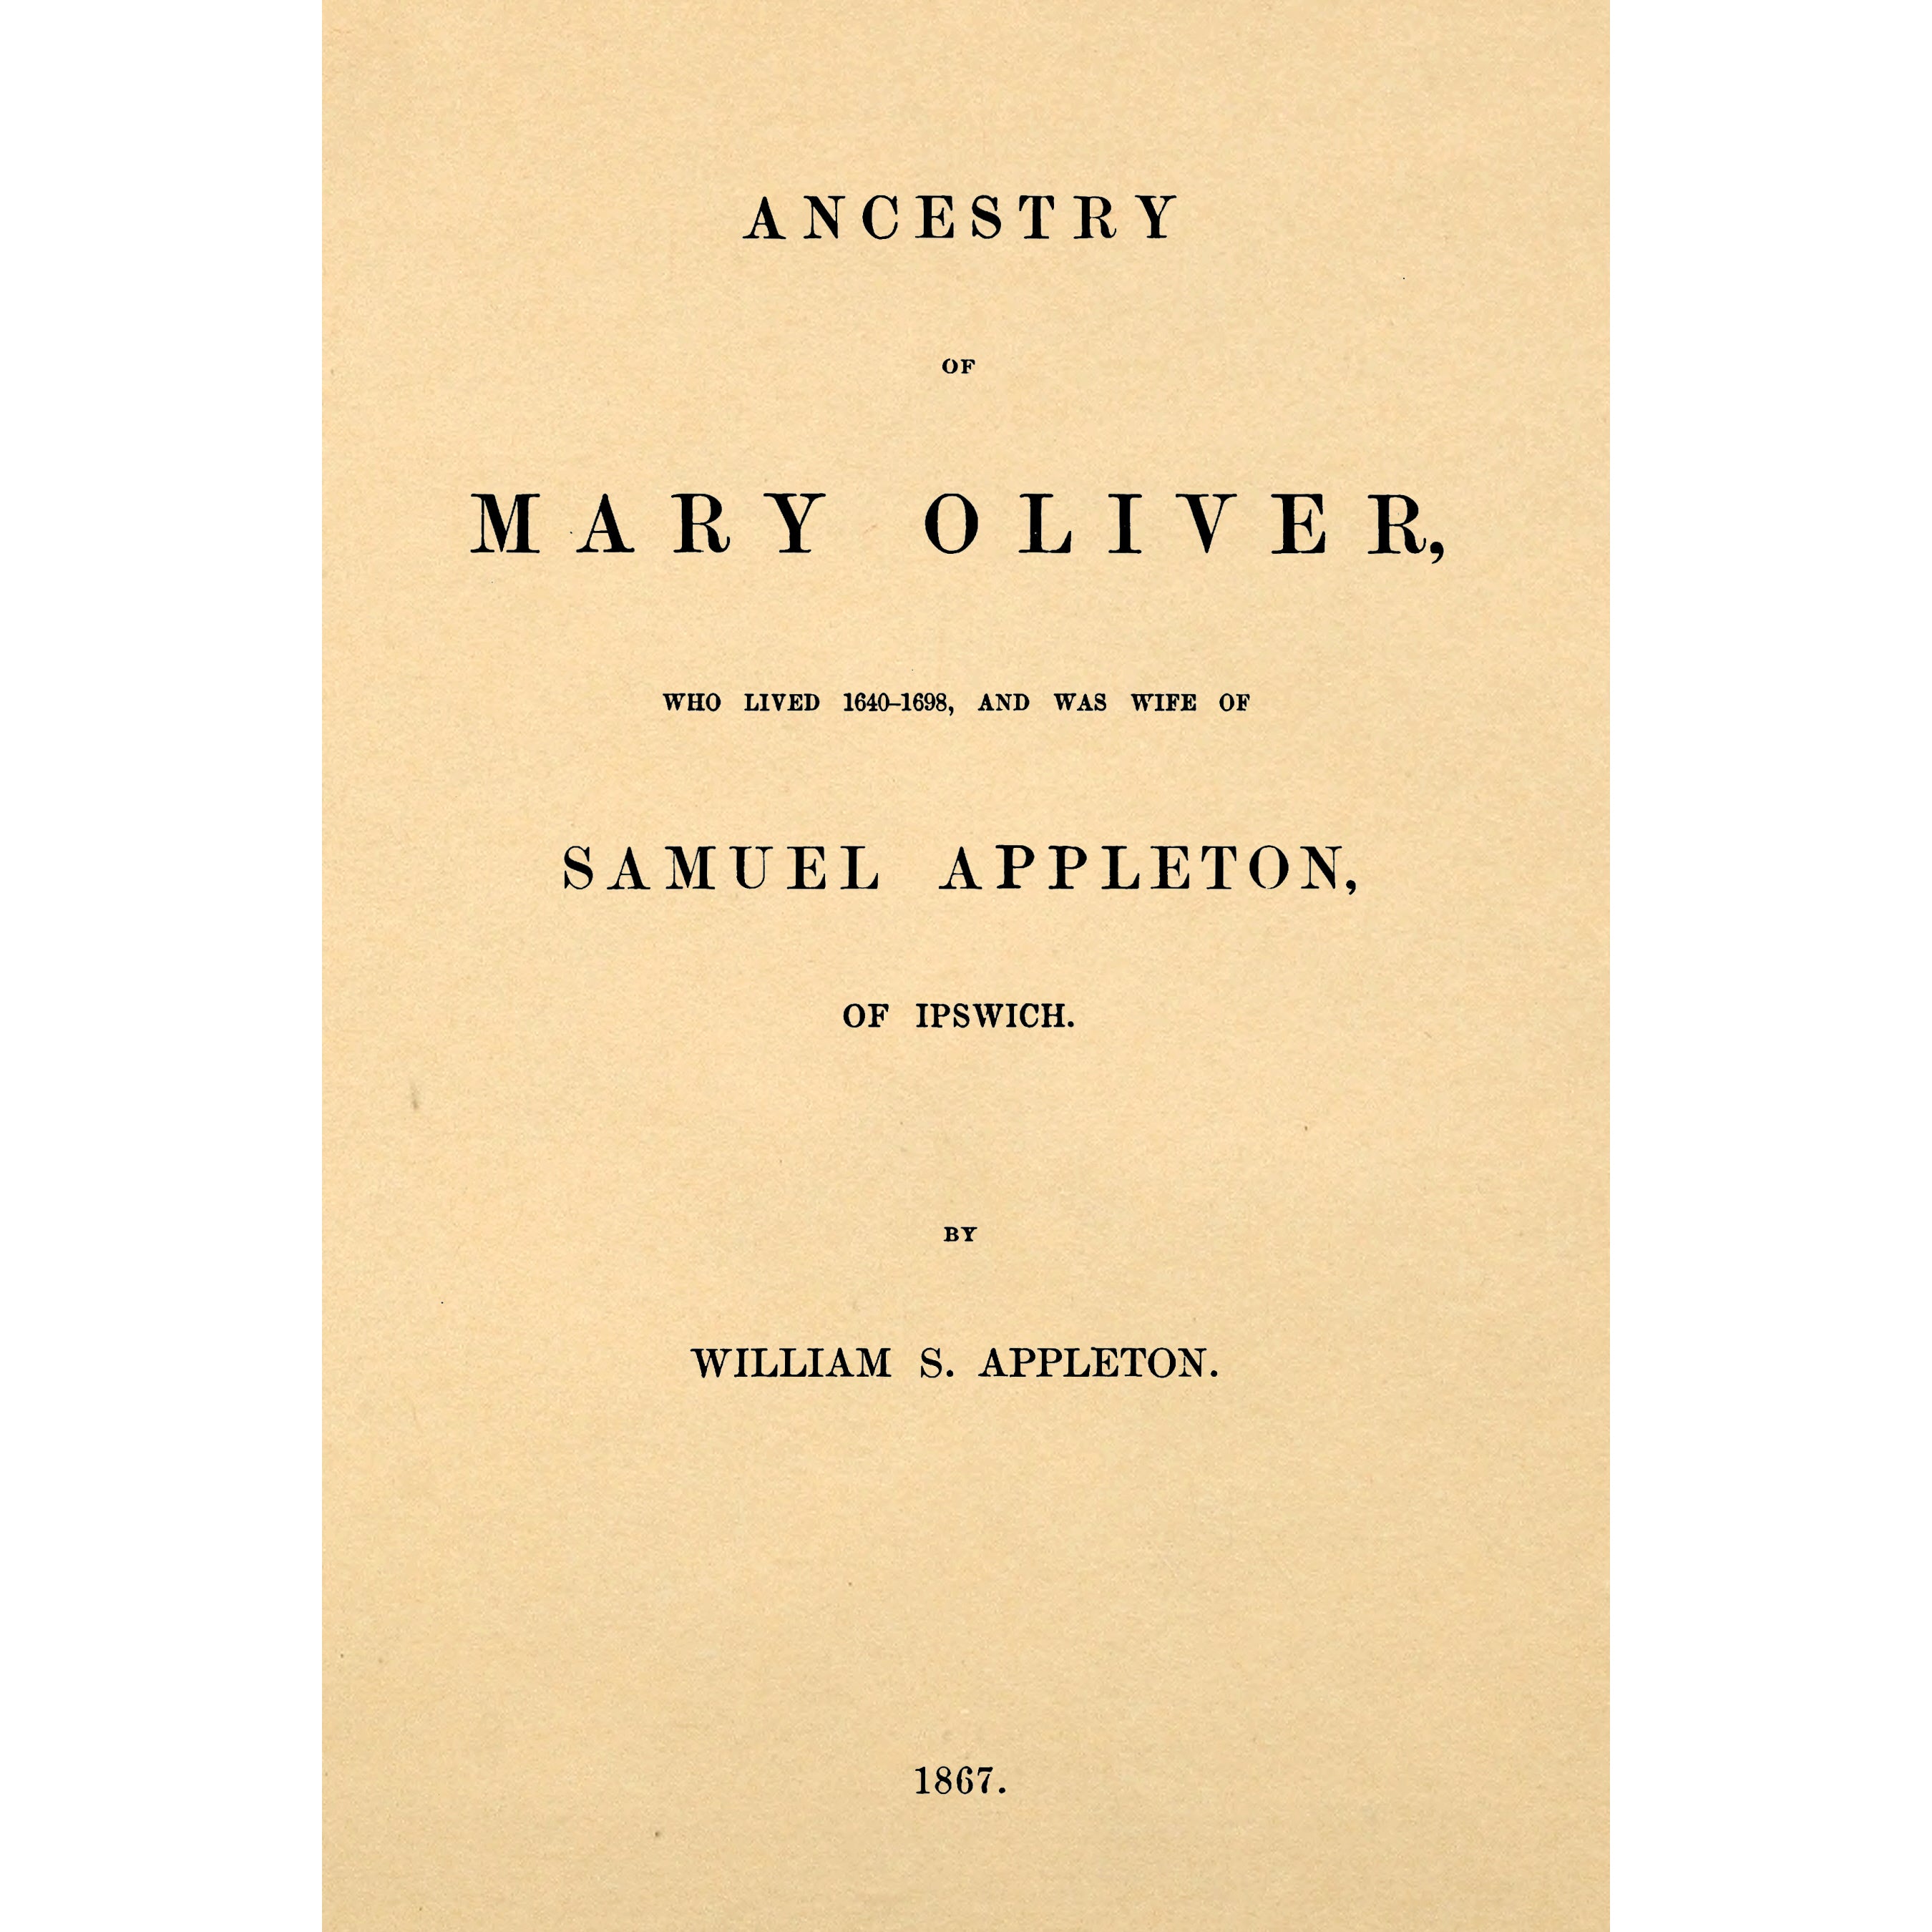 Ancestry of Mary Oliver, who lived 1640-1698, and was wife of Samuel Appleton, of Ipswich